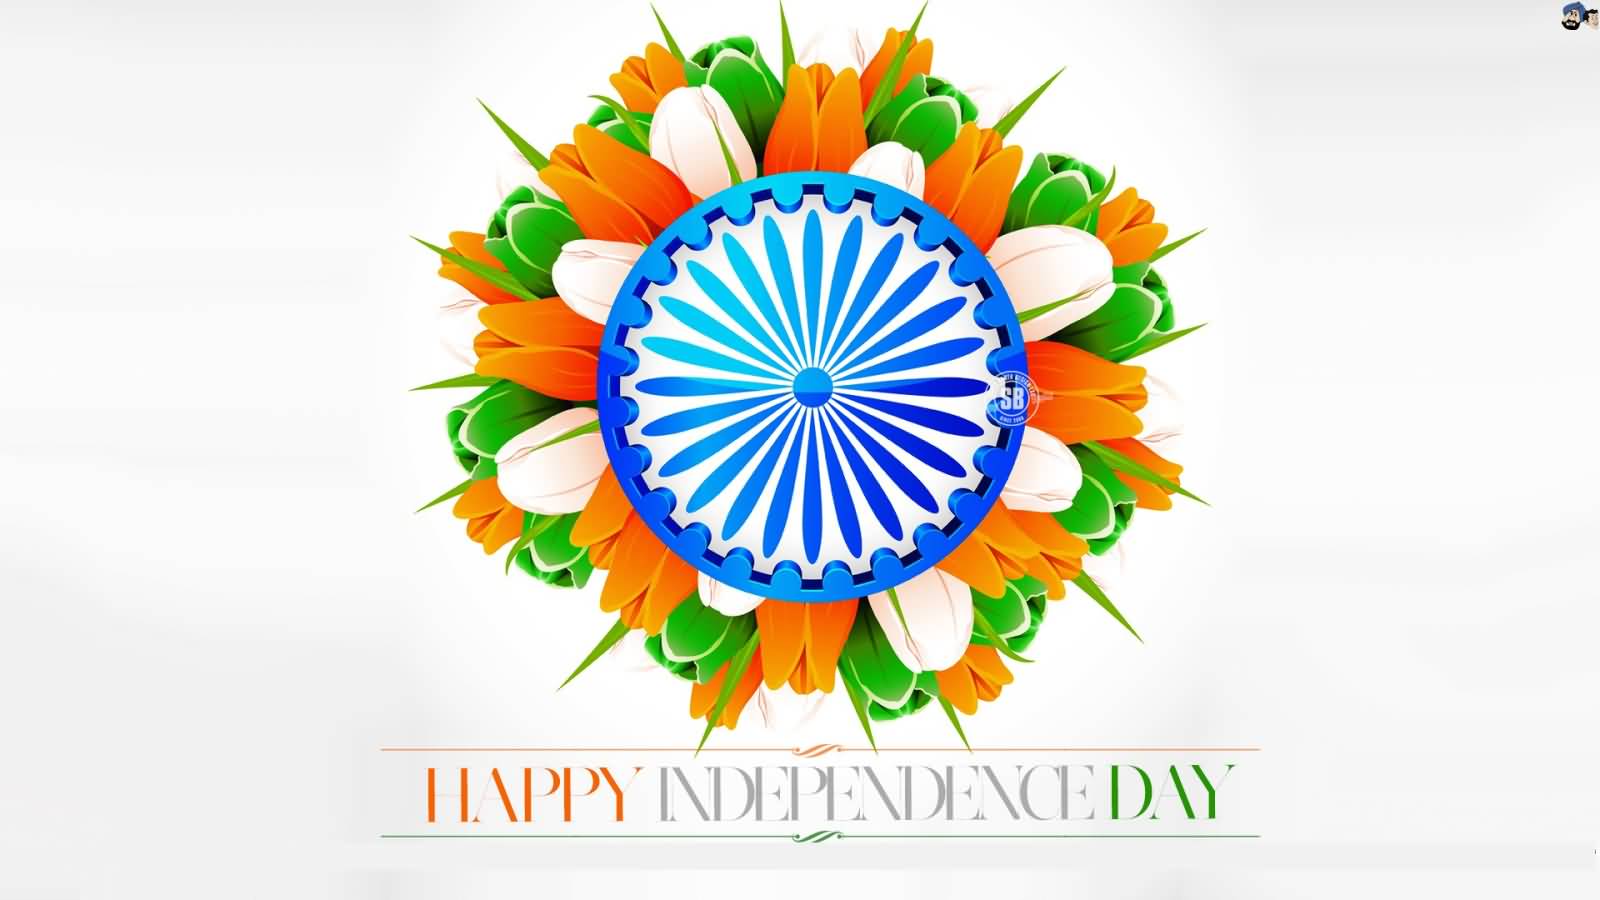 60+ Most Beautiful Greeting Pictures Of Independence Day Of India